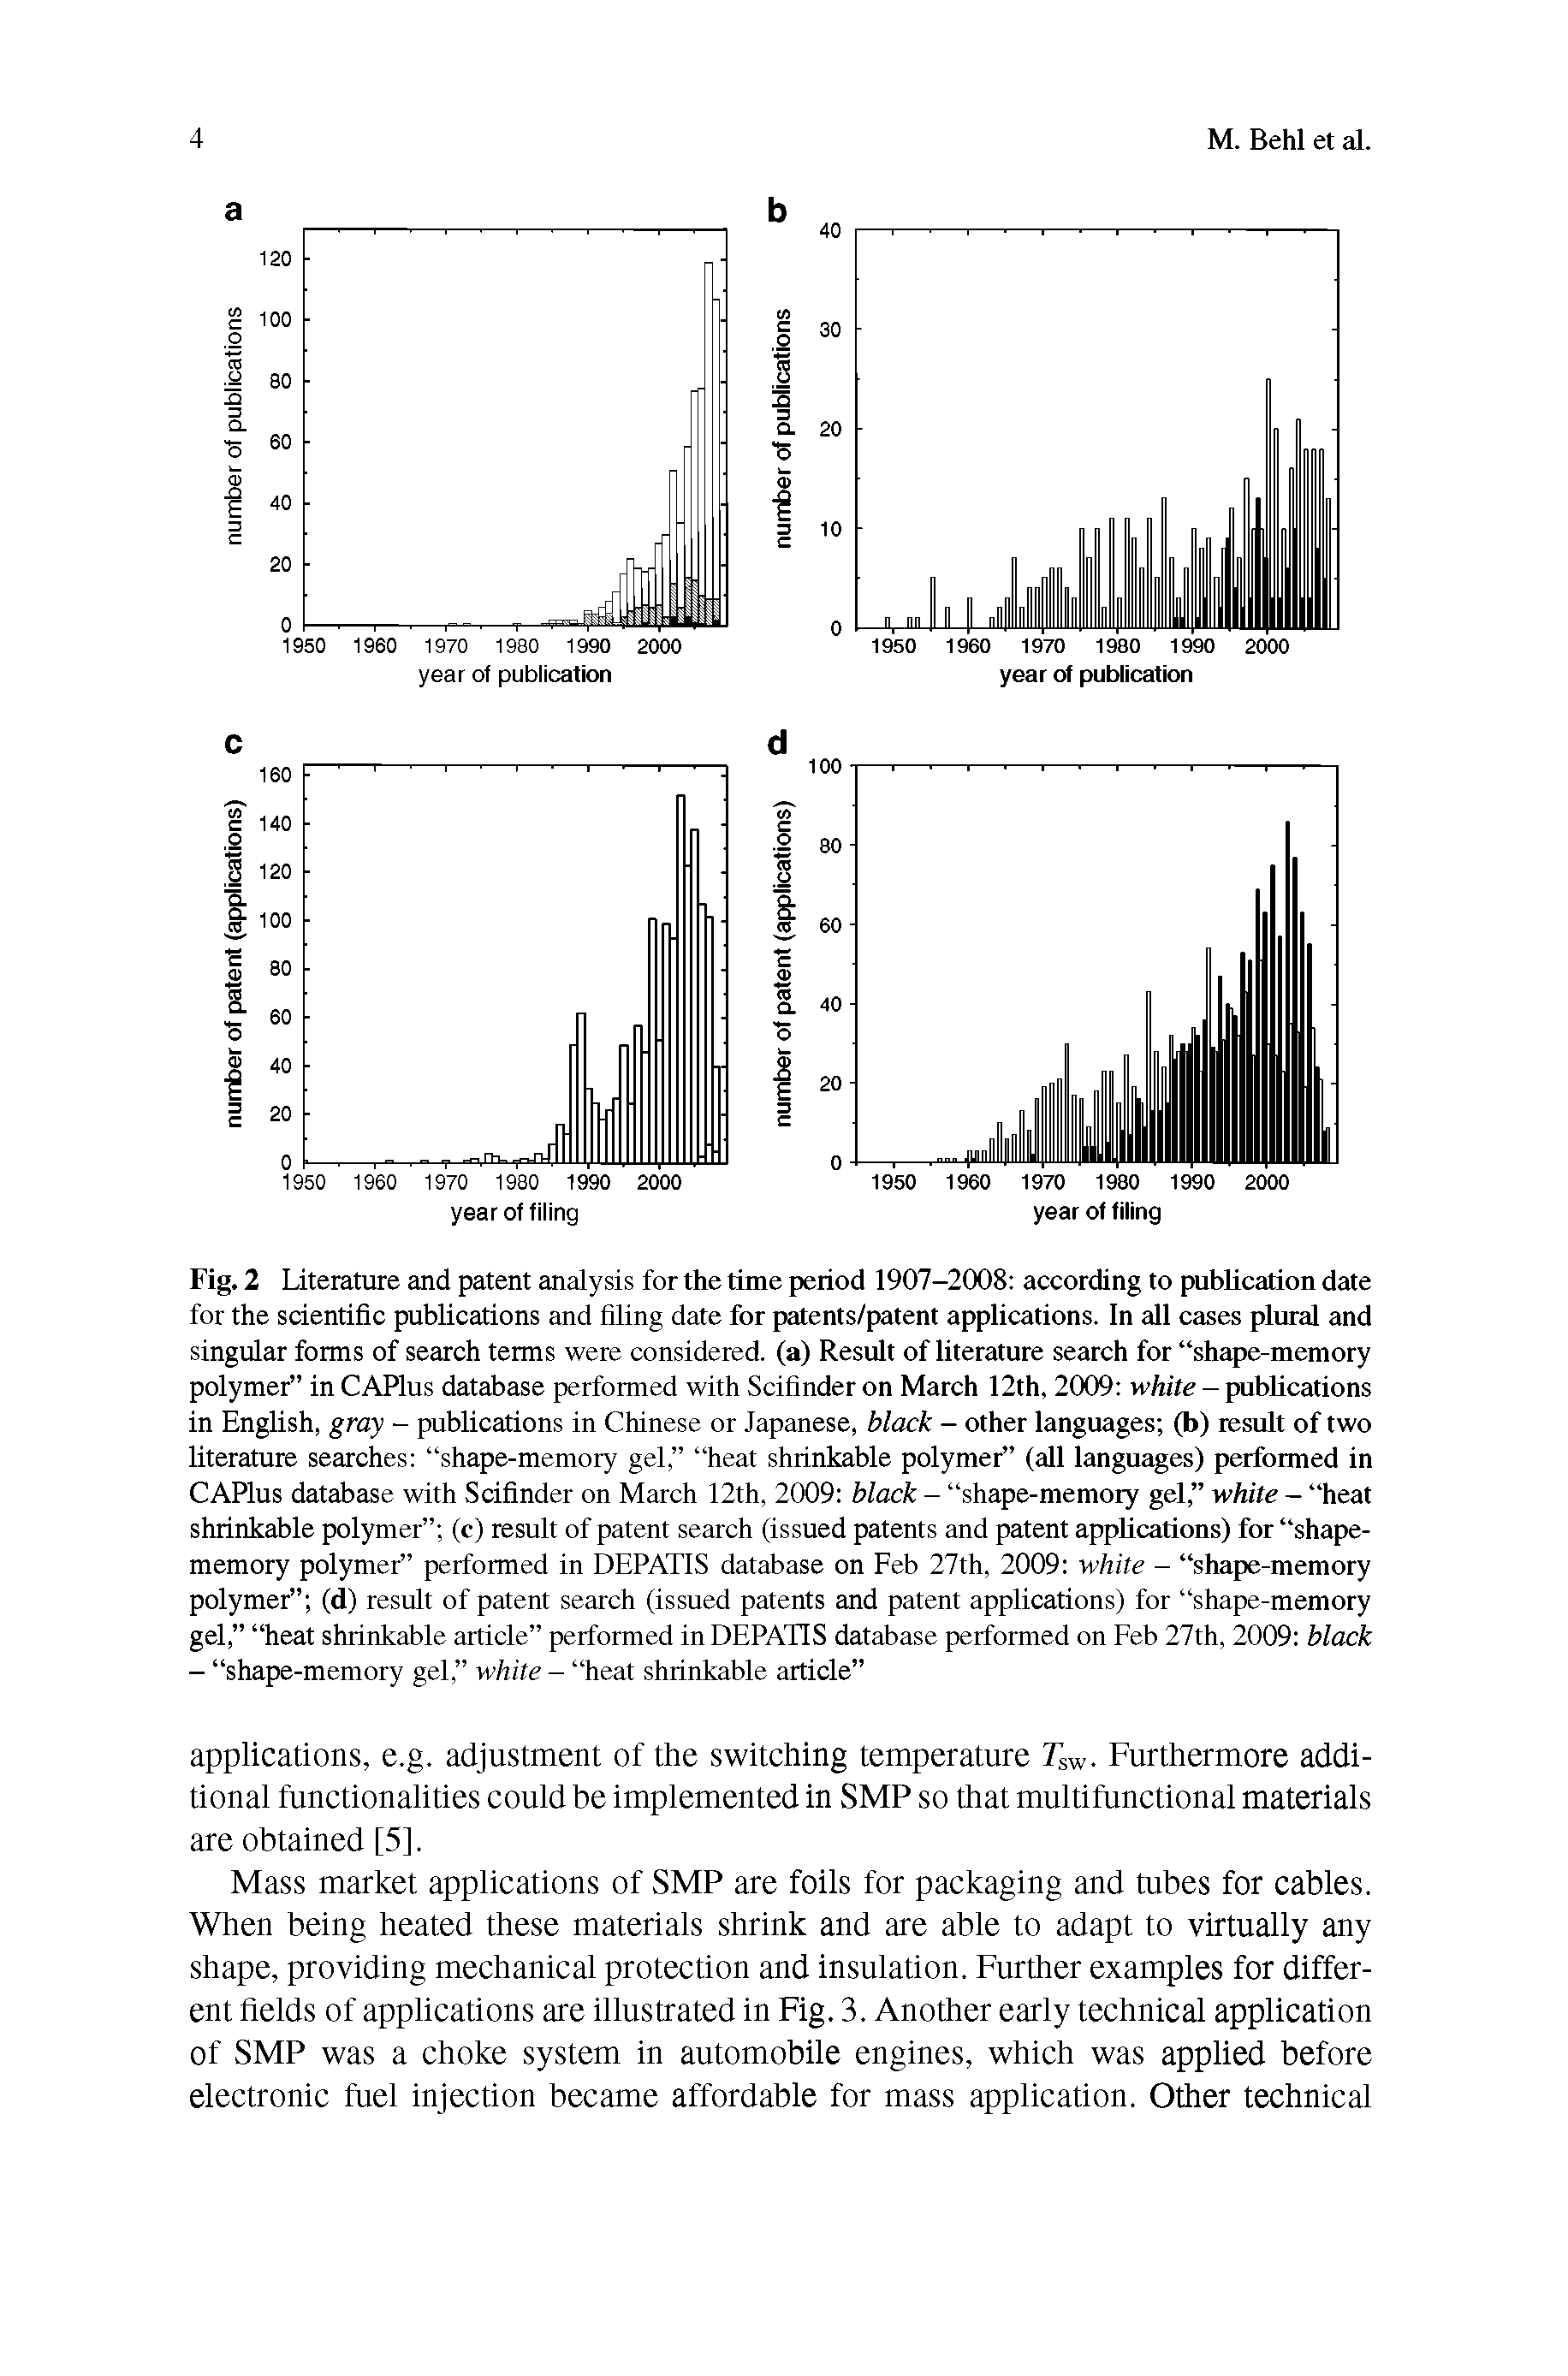 Fig. 2 Literature and patent analysis for the time period 1907-2008 according to pubUcadon date for the scientific publications and filing date for patents/patent applications. In all cases plural and singular forms of search terms were considered, (a) Result of literature search for shape-memory polymer in CAPlus database performed with Scifinder on March 12th, 2009 white - publications in English, gray - publications in Chinese or Japanese, black - other languages (b) result of two literature searches shape-memory gel, heat shrinkable polymer (all languages) performed in CAPlus database with Scifinder on March 12th, 2009 black - shape-memory gel, white - heat shrinkable polymer (c) result of patent search (issued patents and patent applications) for shape-memory polymer performed in DEPATIS database on Feb 27th, 2009 white - shape-memory polymer (d) result of patent search (issued patents and patent applications) for shape-memory gel, heat shrinkable article performed in DEPATIS database performed on Feb 27th, 2009 black - shape-memory gel, white - heat shrinkable article ...